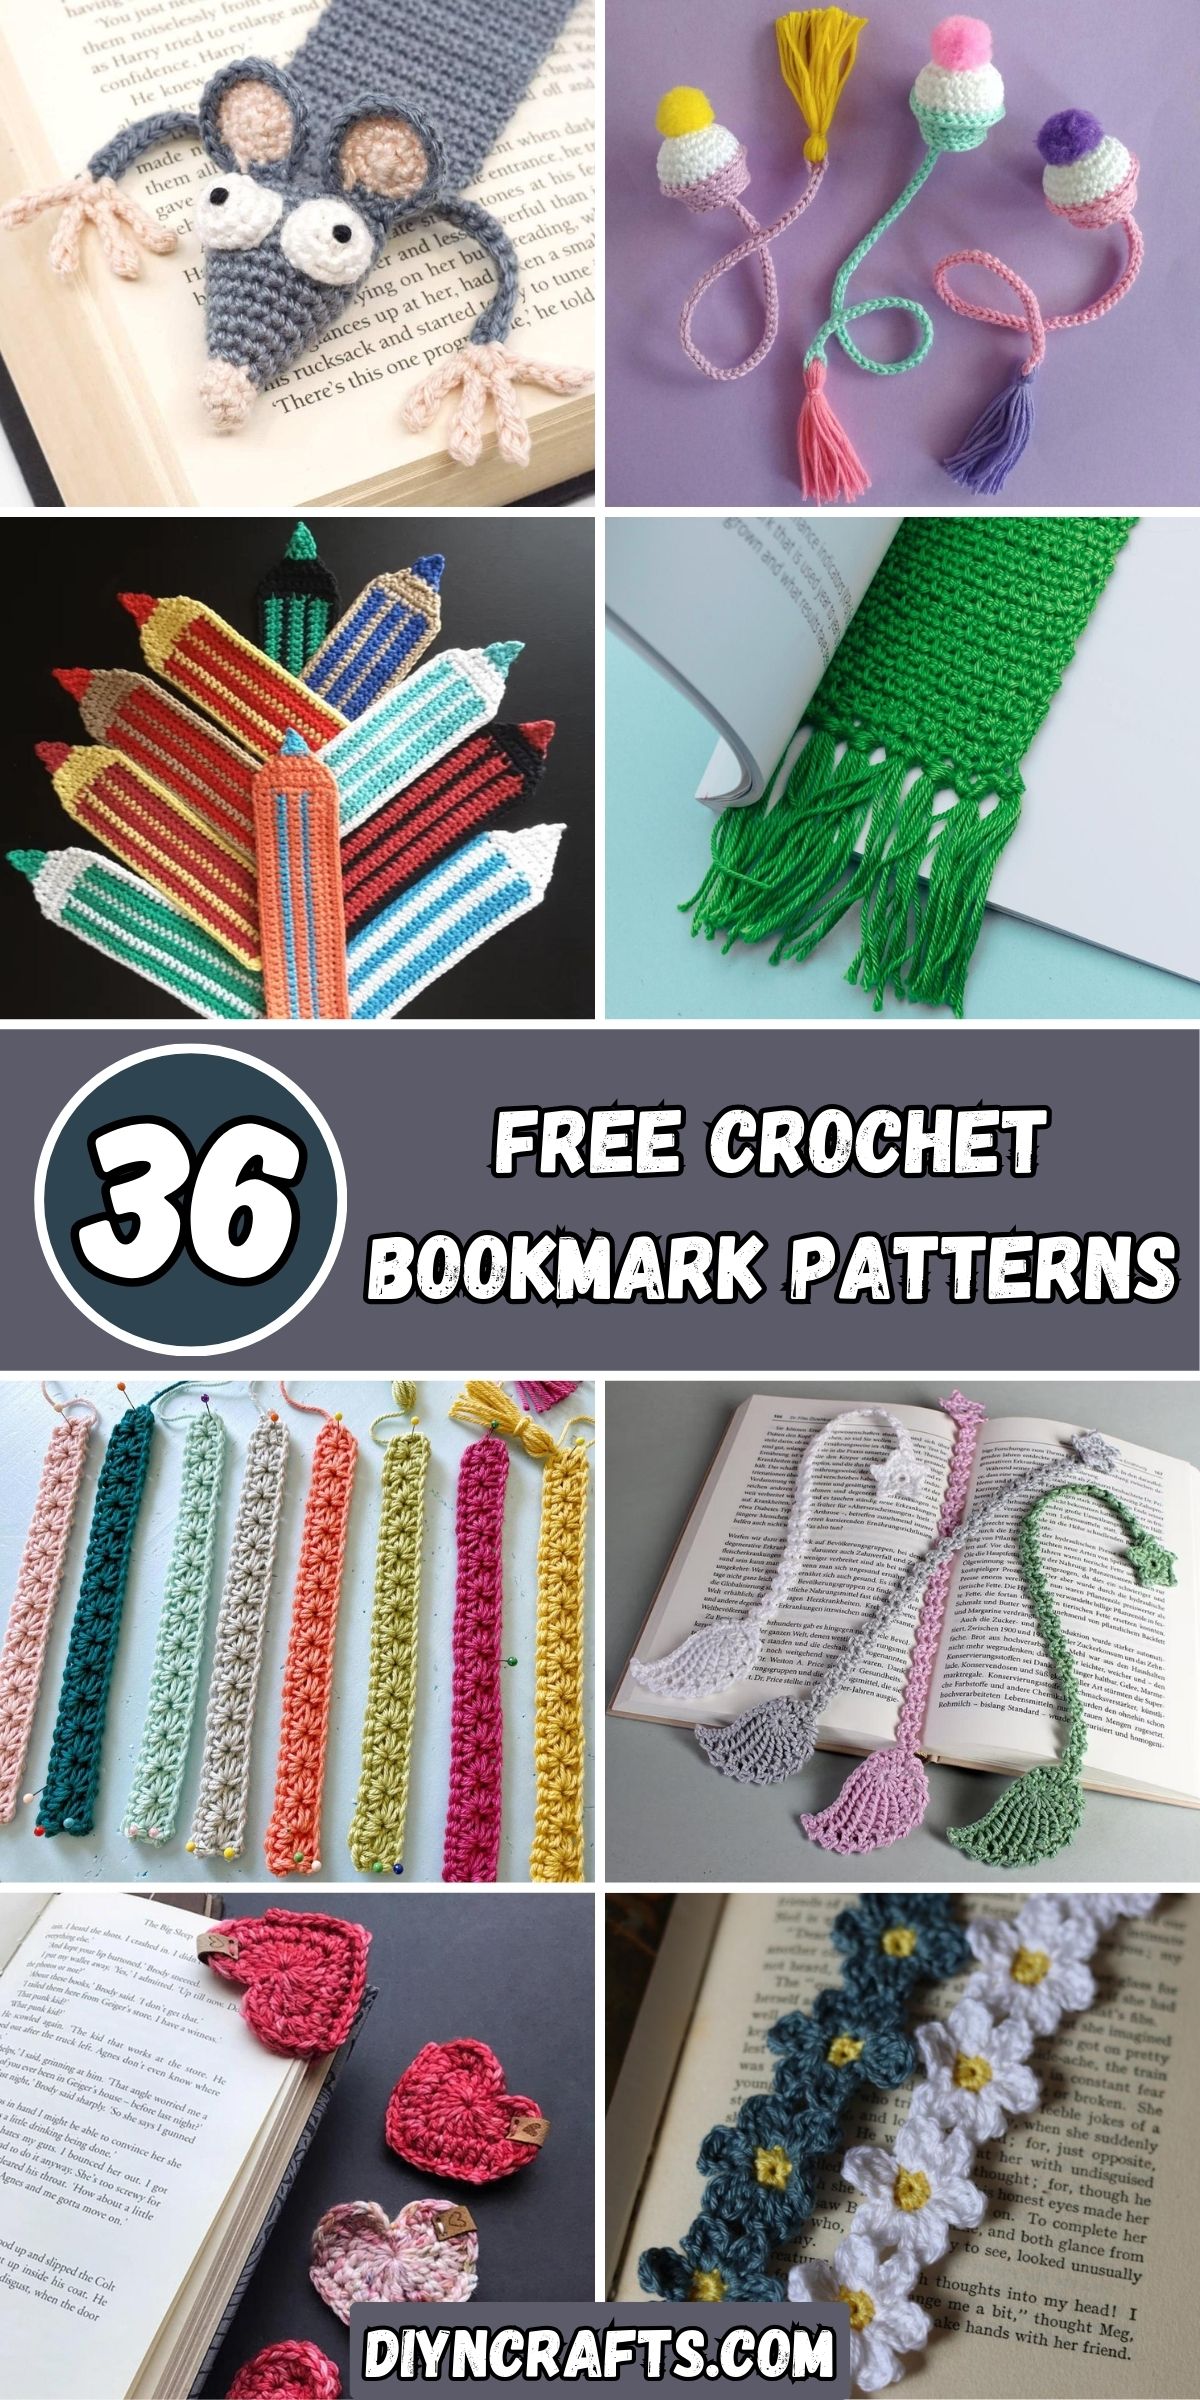 36 Free Crochet Bookmark Patterns collage.